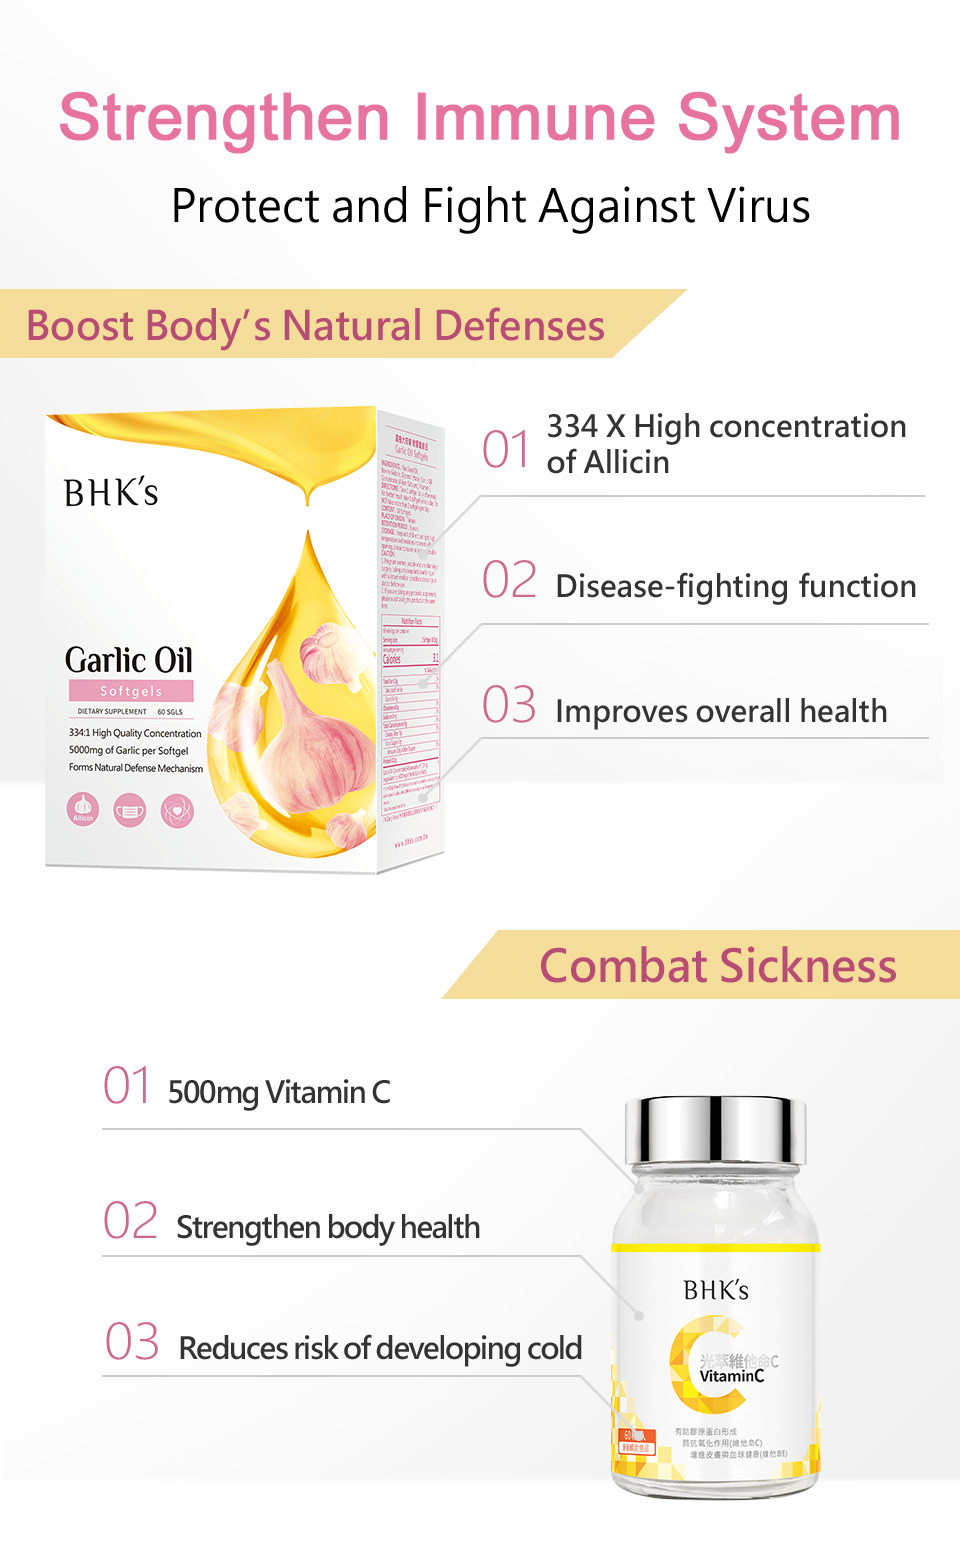 BHK’s Concentrate Garlic supplements are known to boost the function of the immune system.